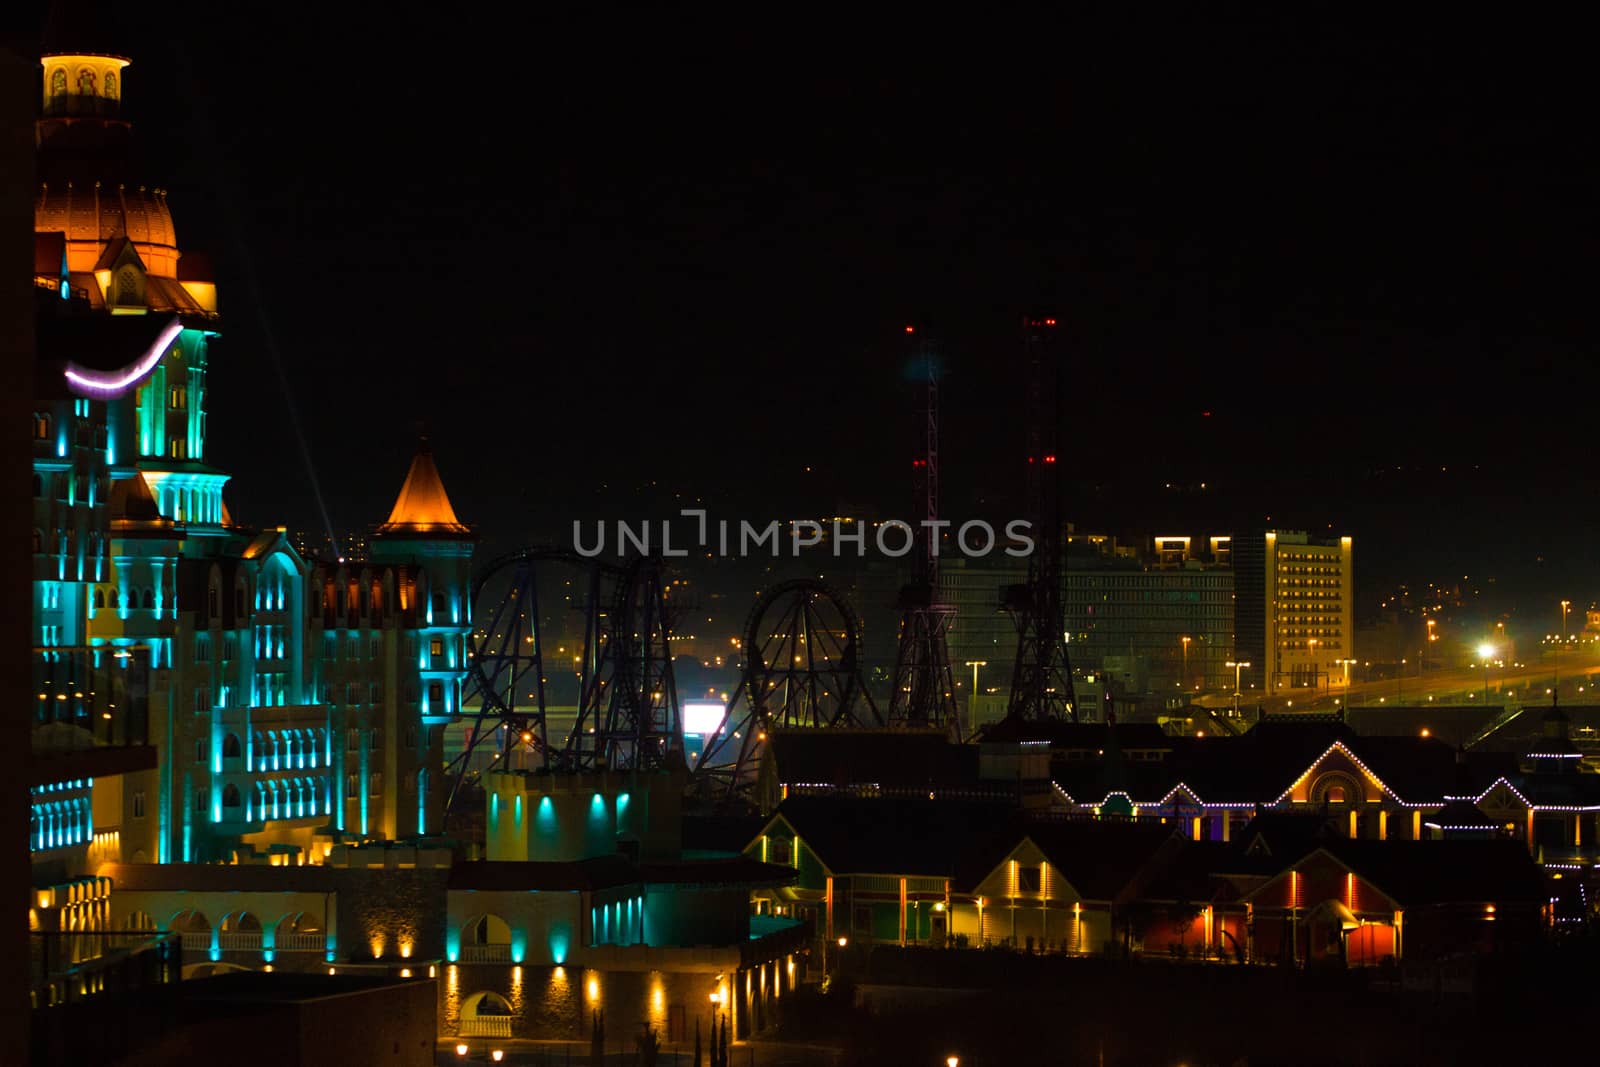 Fantastic view of a big city at night with illuminated modern architecture. by boys1983@mail.ru